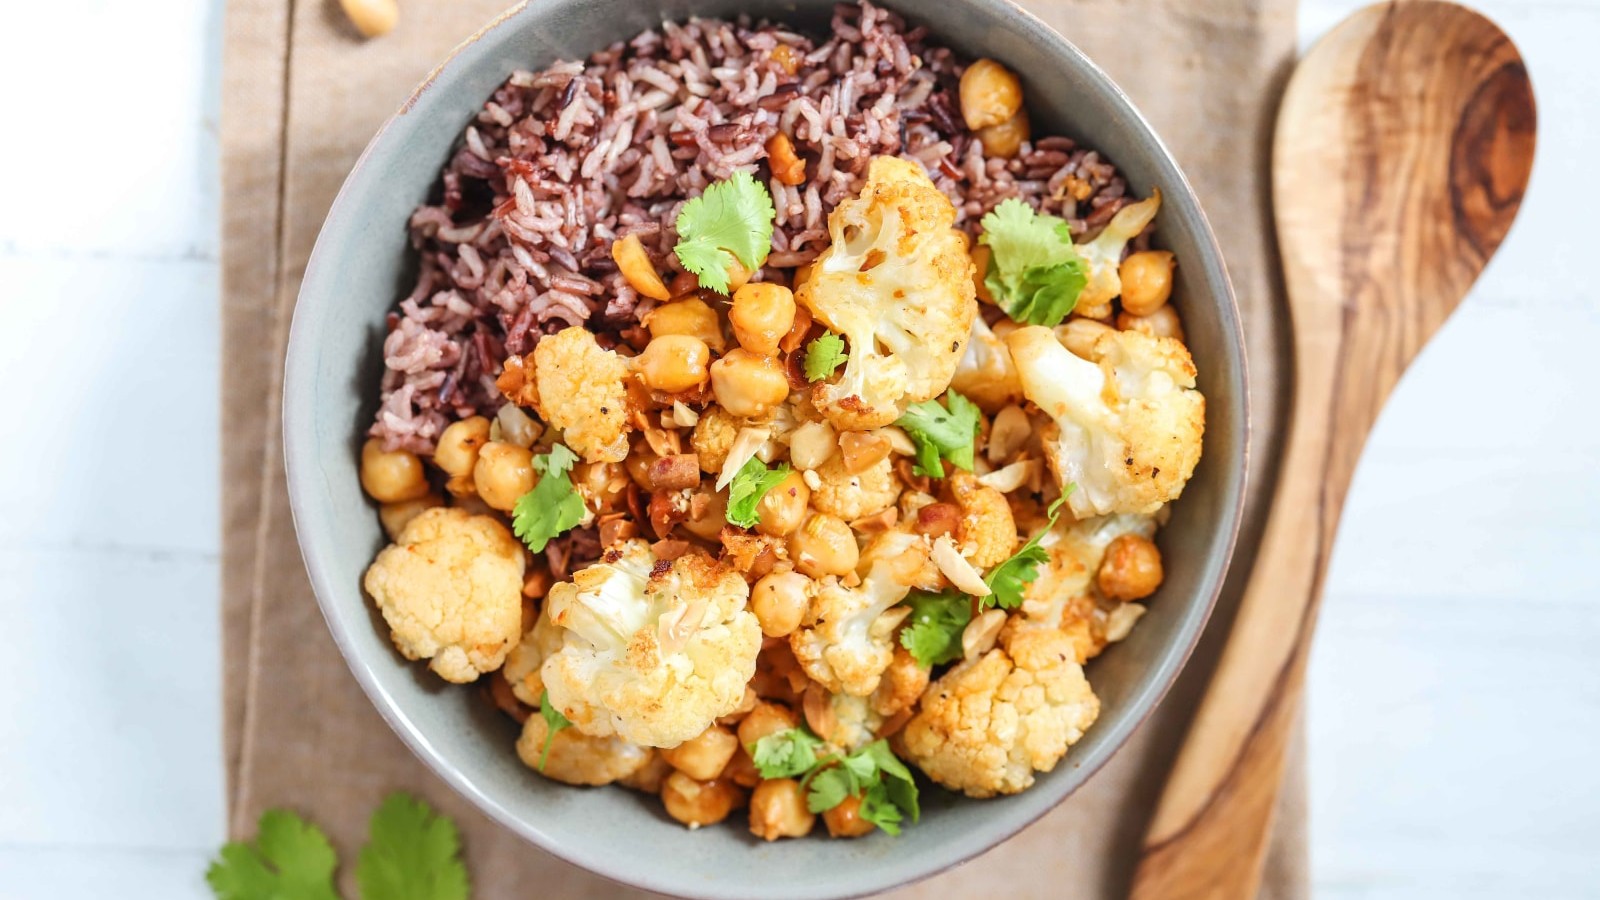 Image of Spicy Cauliflower & Chickpea Rice Bowl